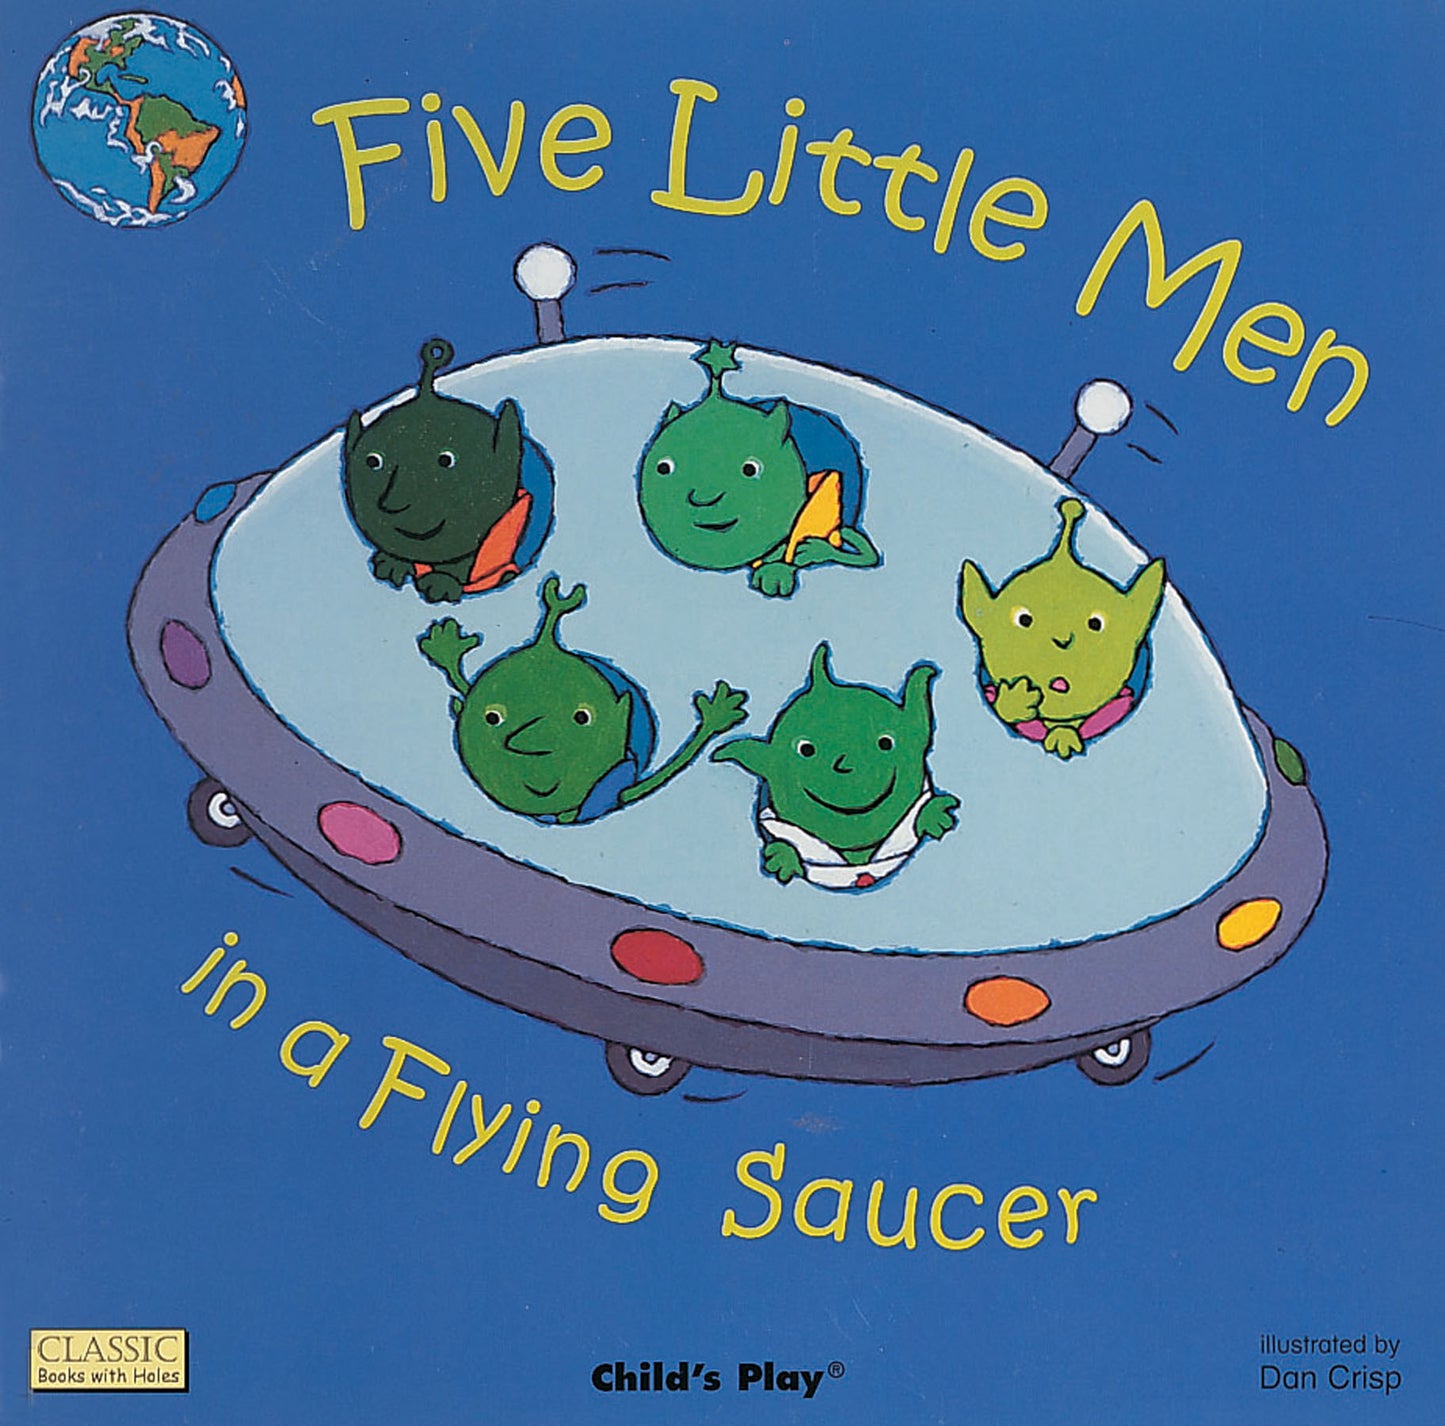 Five Little Men in a Flying Saucer (Softcover Edition)